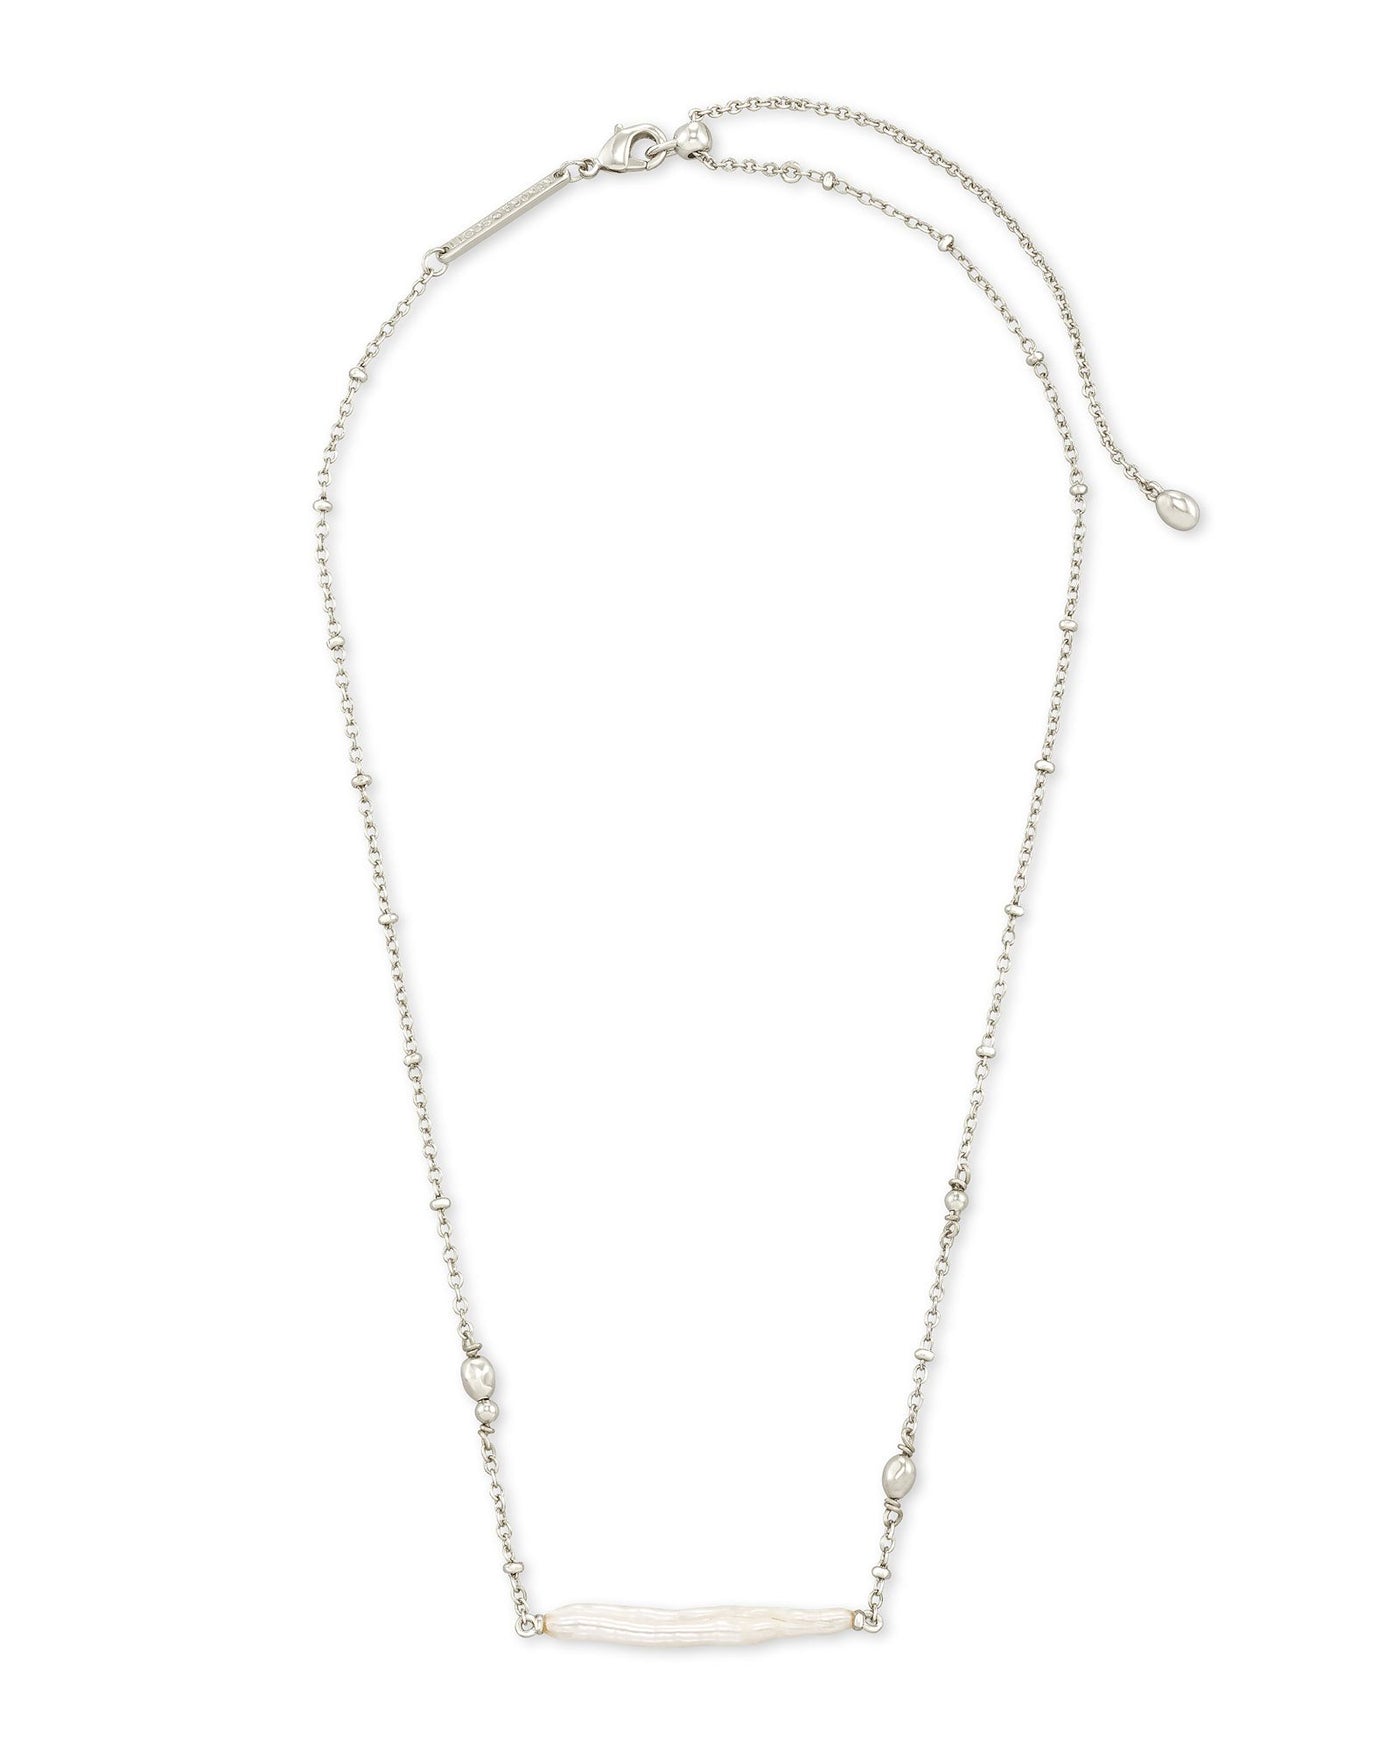 Kendra Scott Eileen Pendant Necklace in Silver on white background full view.